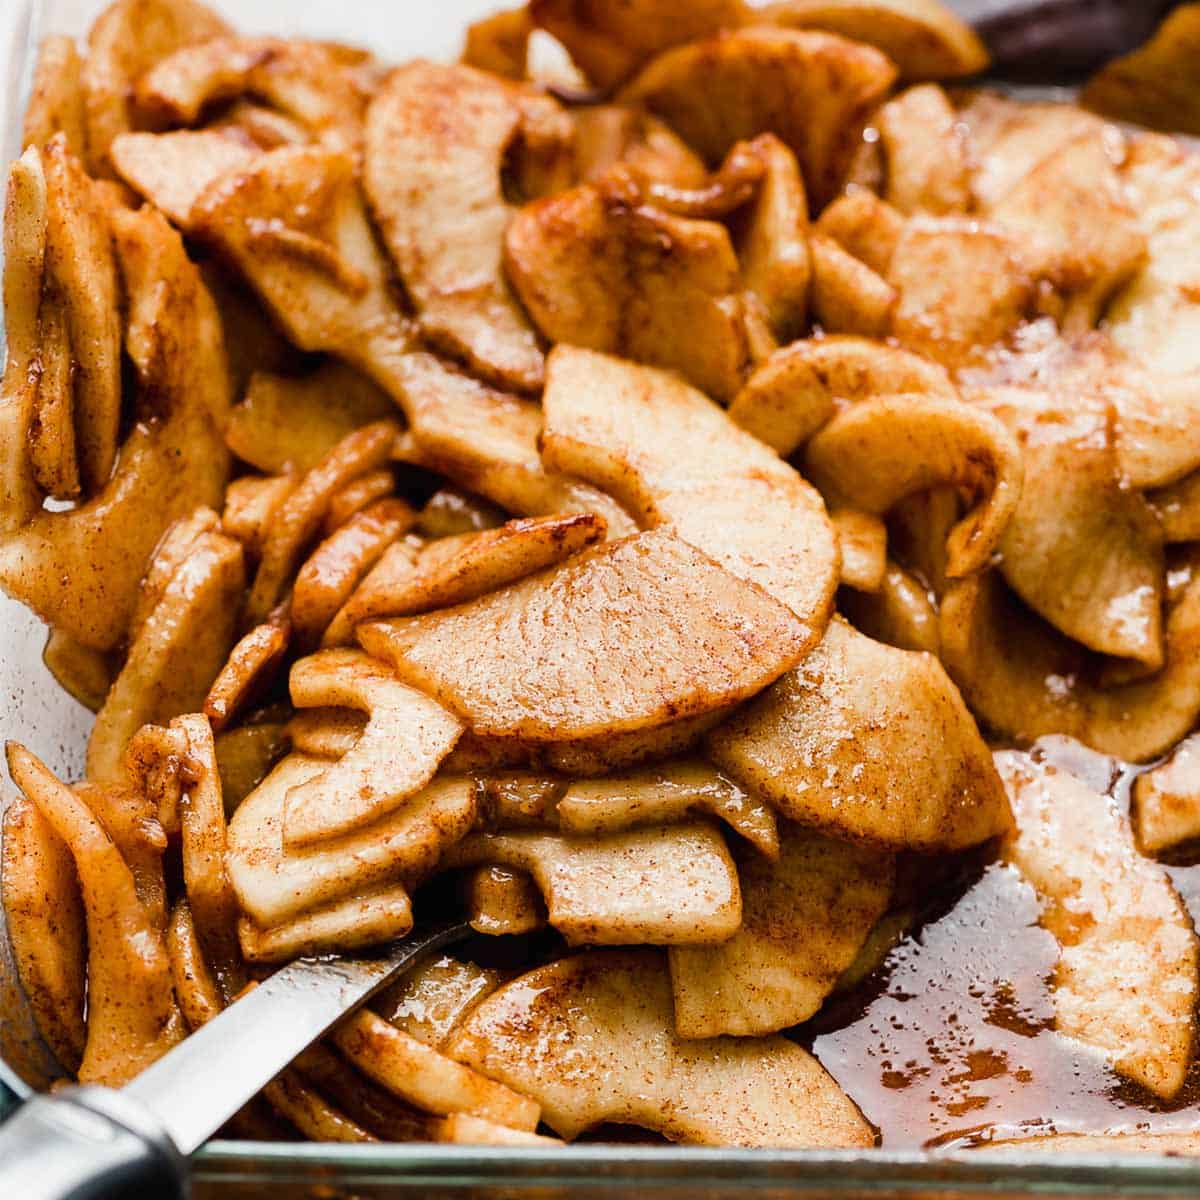 Cinnamon Baked Apples in a cinnamon mixture in a glass pan.